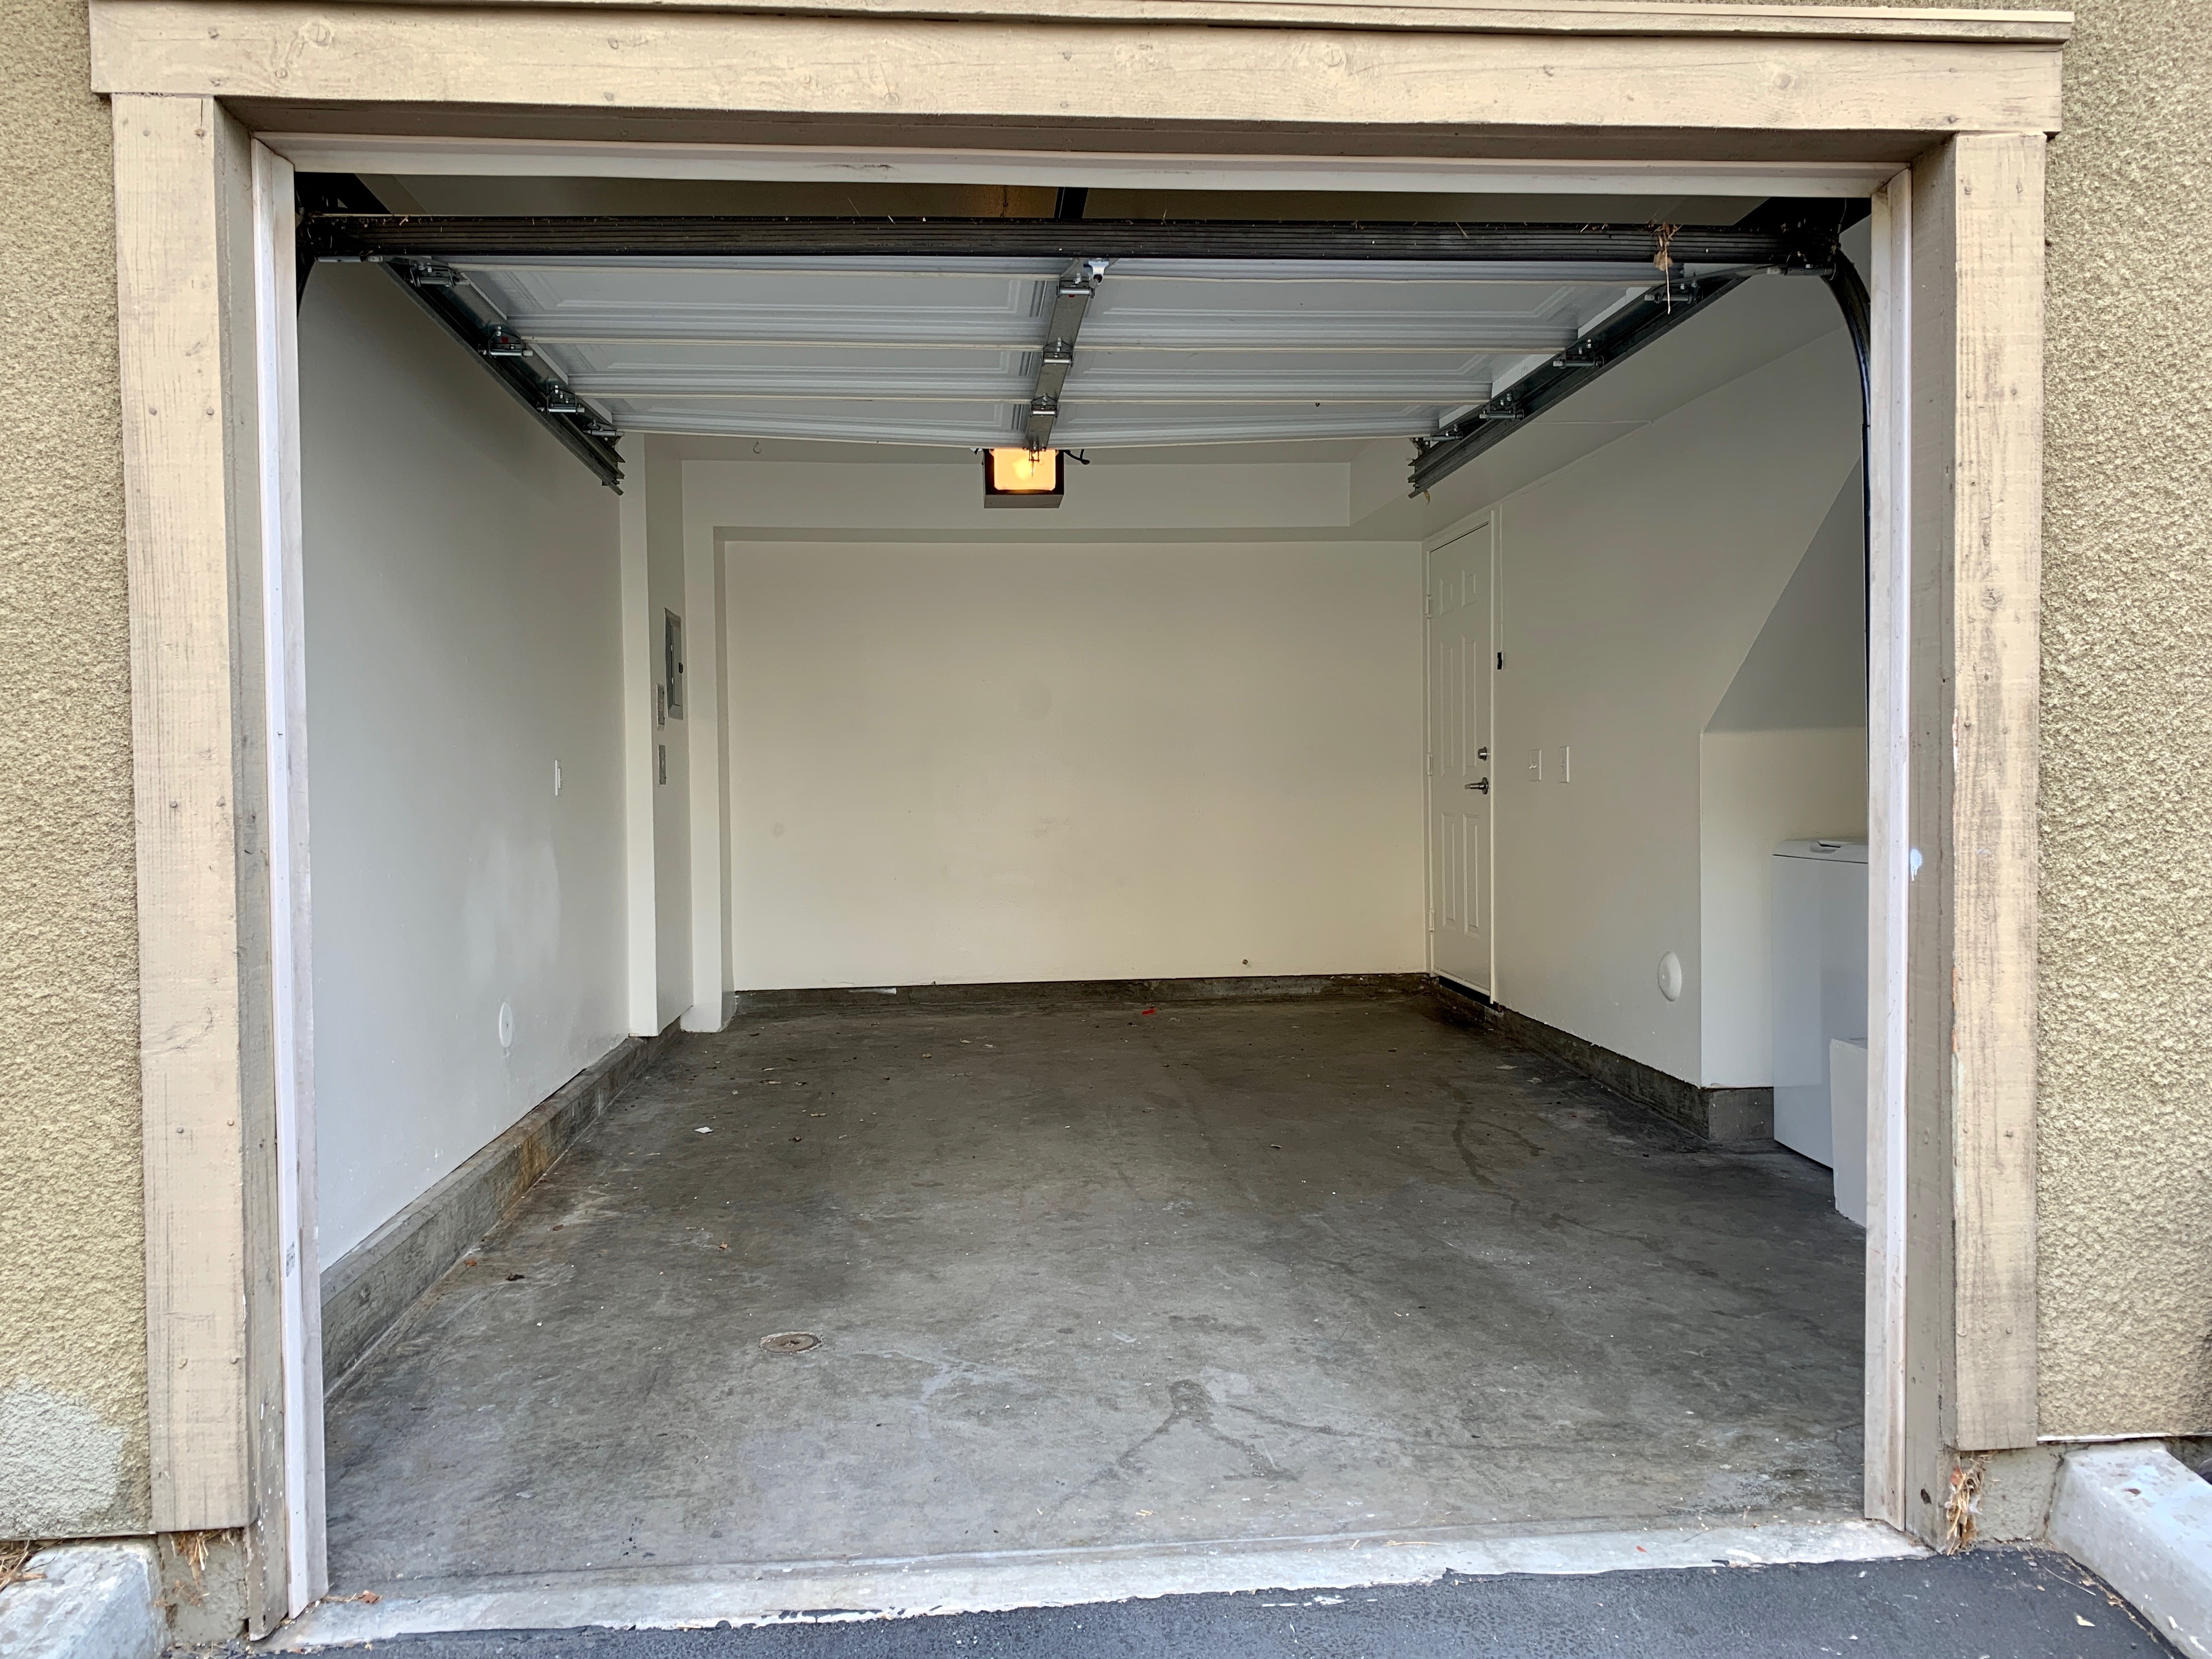 View of an empty garage.